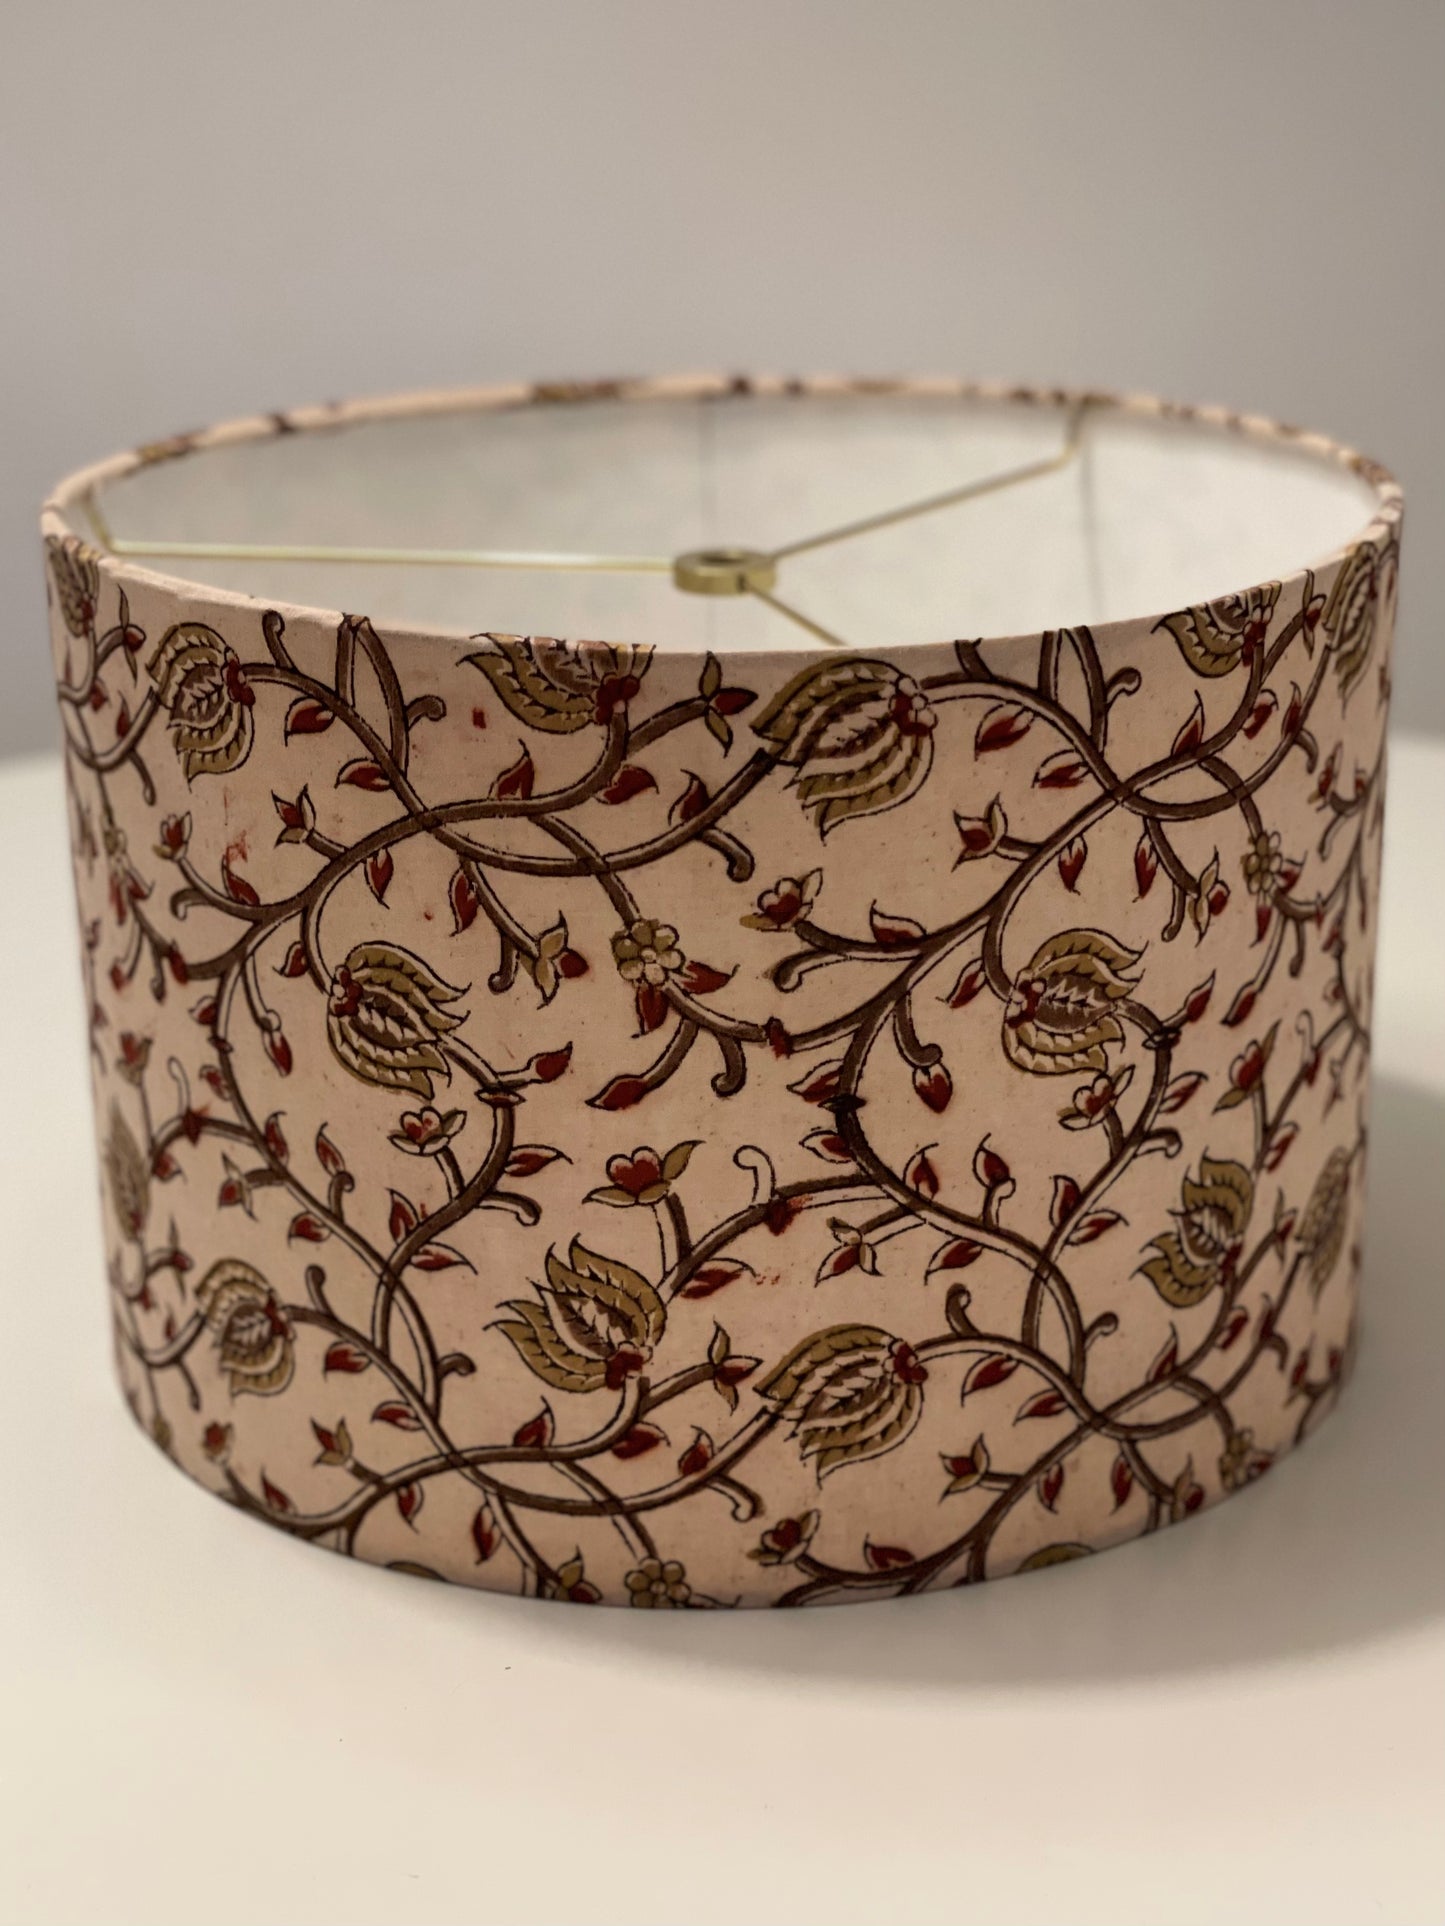 12 Inch Drum Shade. Indian Kalamkari Hand Block Print. Shades of Russet, Ochre, and Coffee, on Fawn.